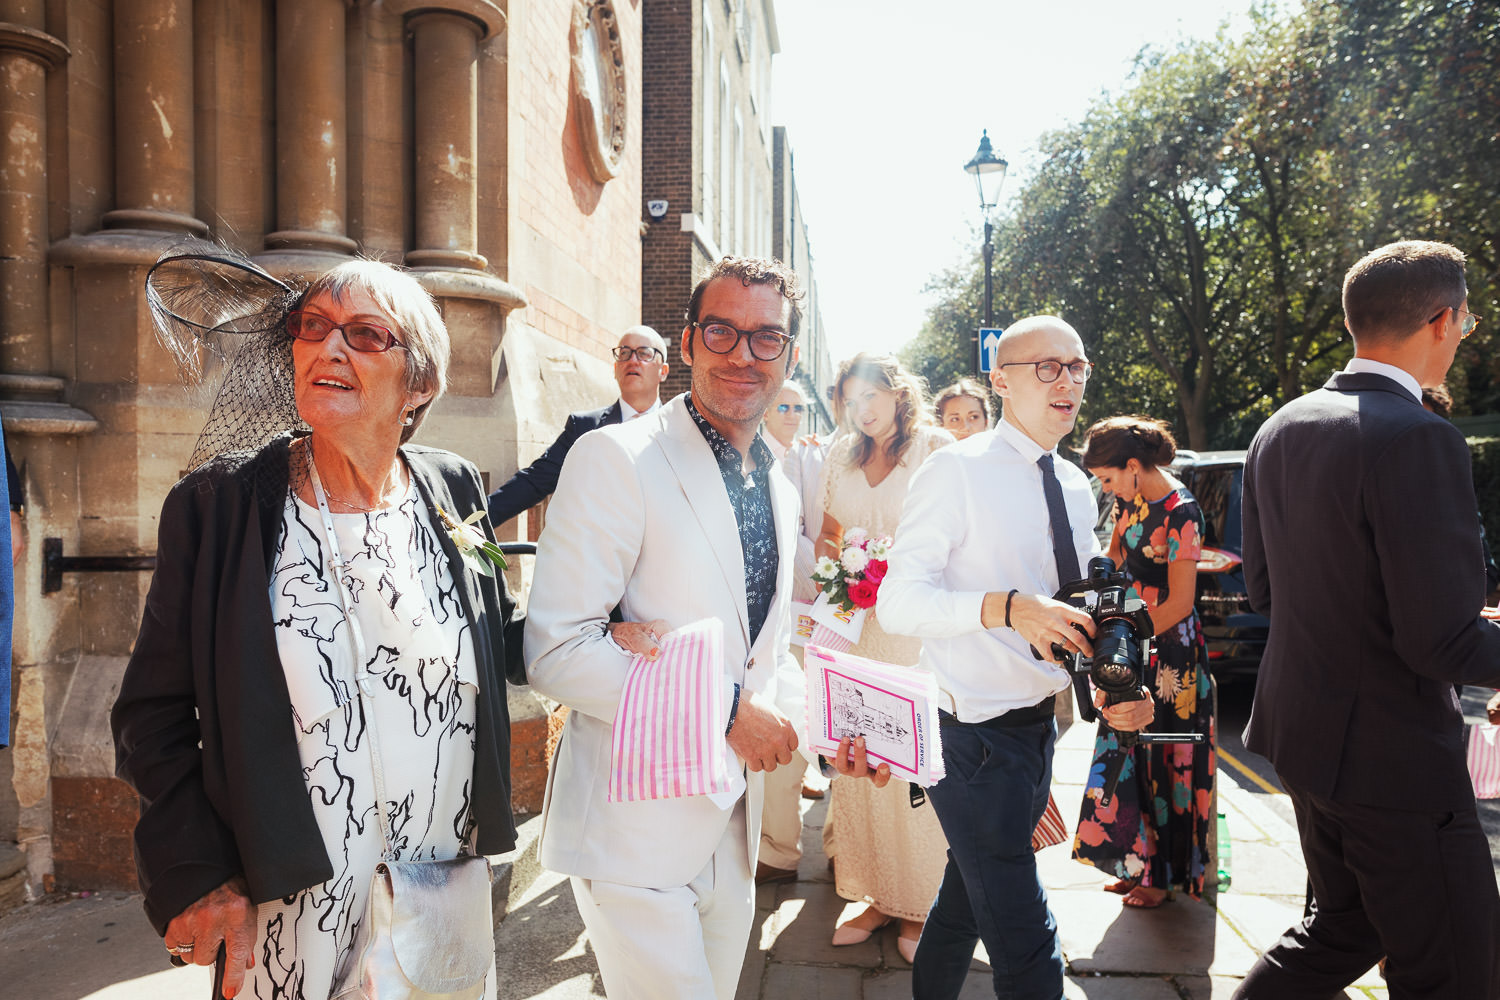 Jake Maskall escorting another guest out of the Union Chapel after a wedding ceremony. He is wearing a white suit, the woman is wearing a black and white dress and a black fascinator.